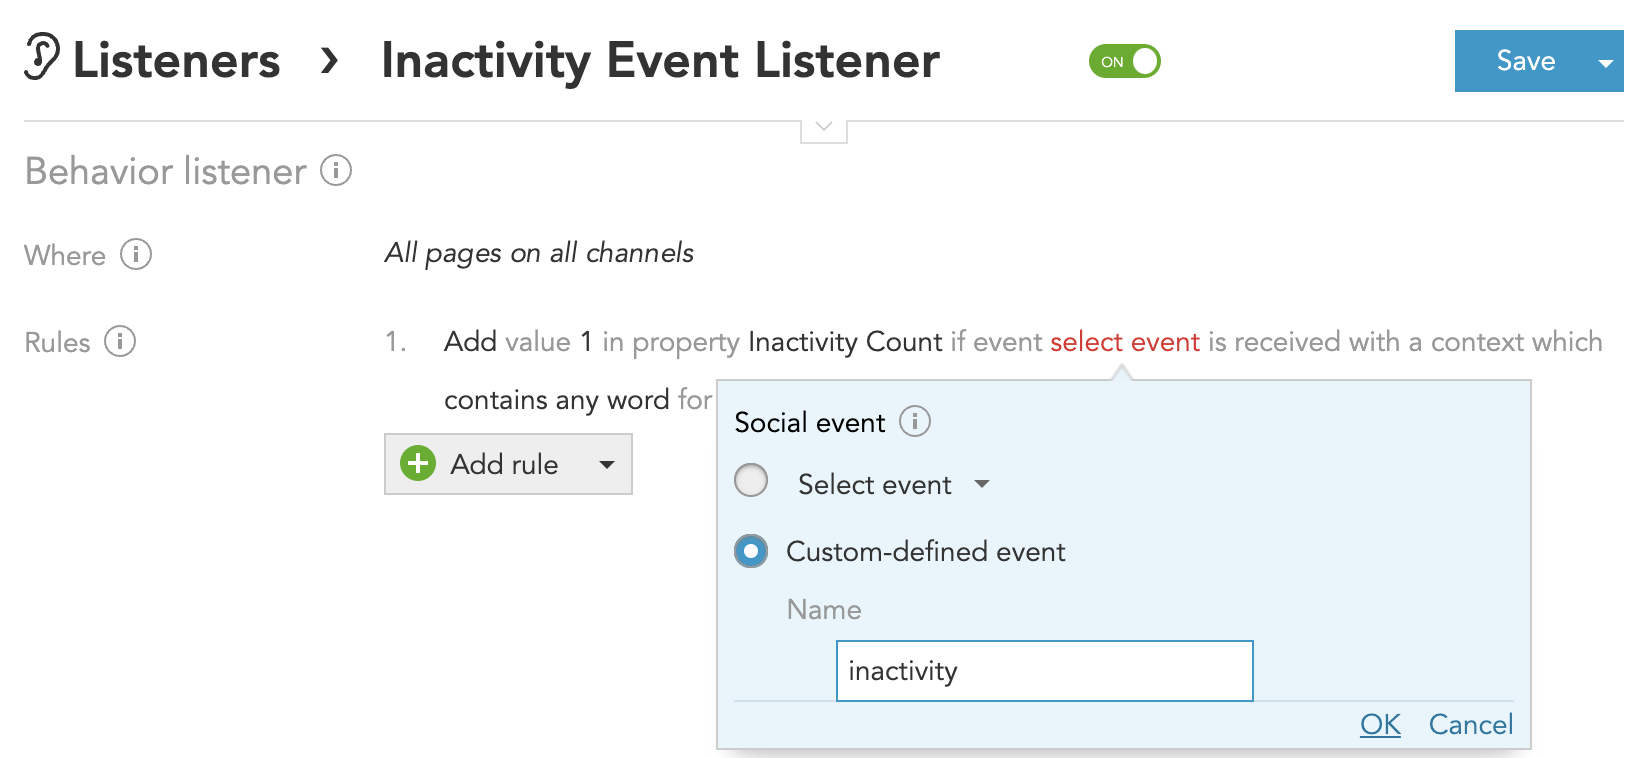 Inactivity_Event_Listener.png